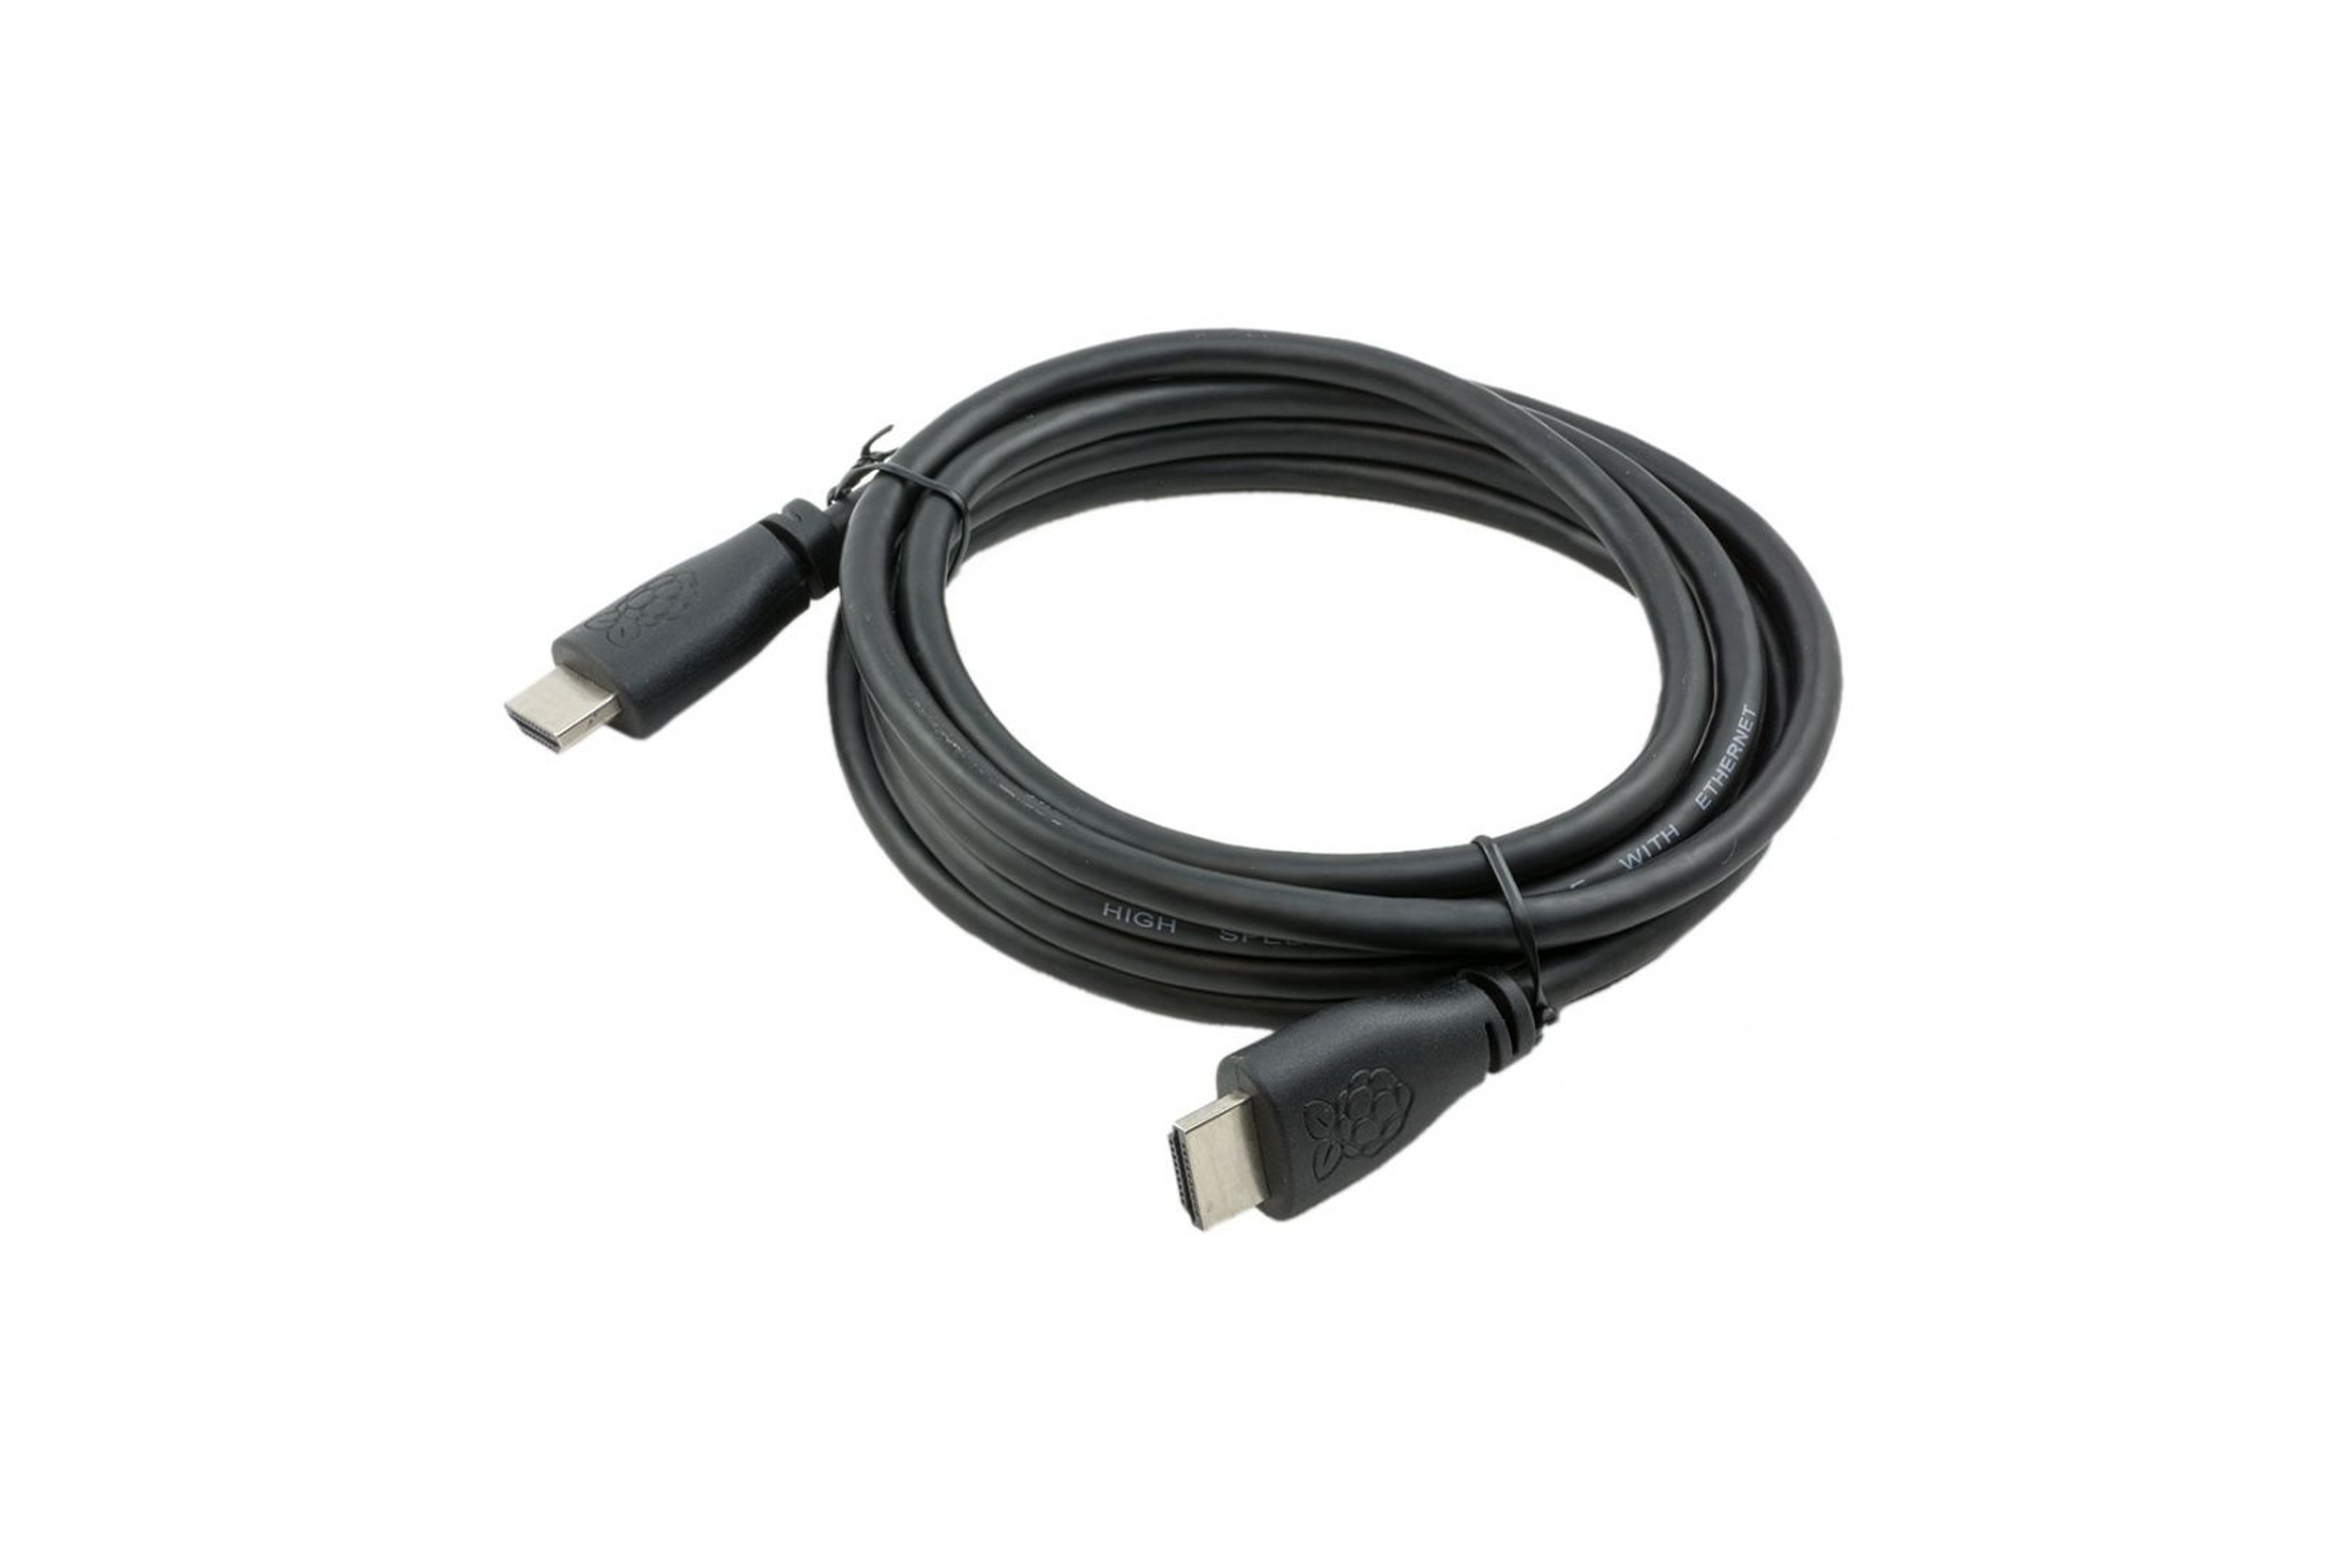 Official Raspberry Pi HDMI Cable - Black 1M